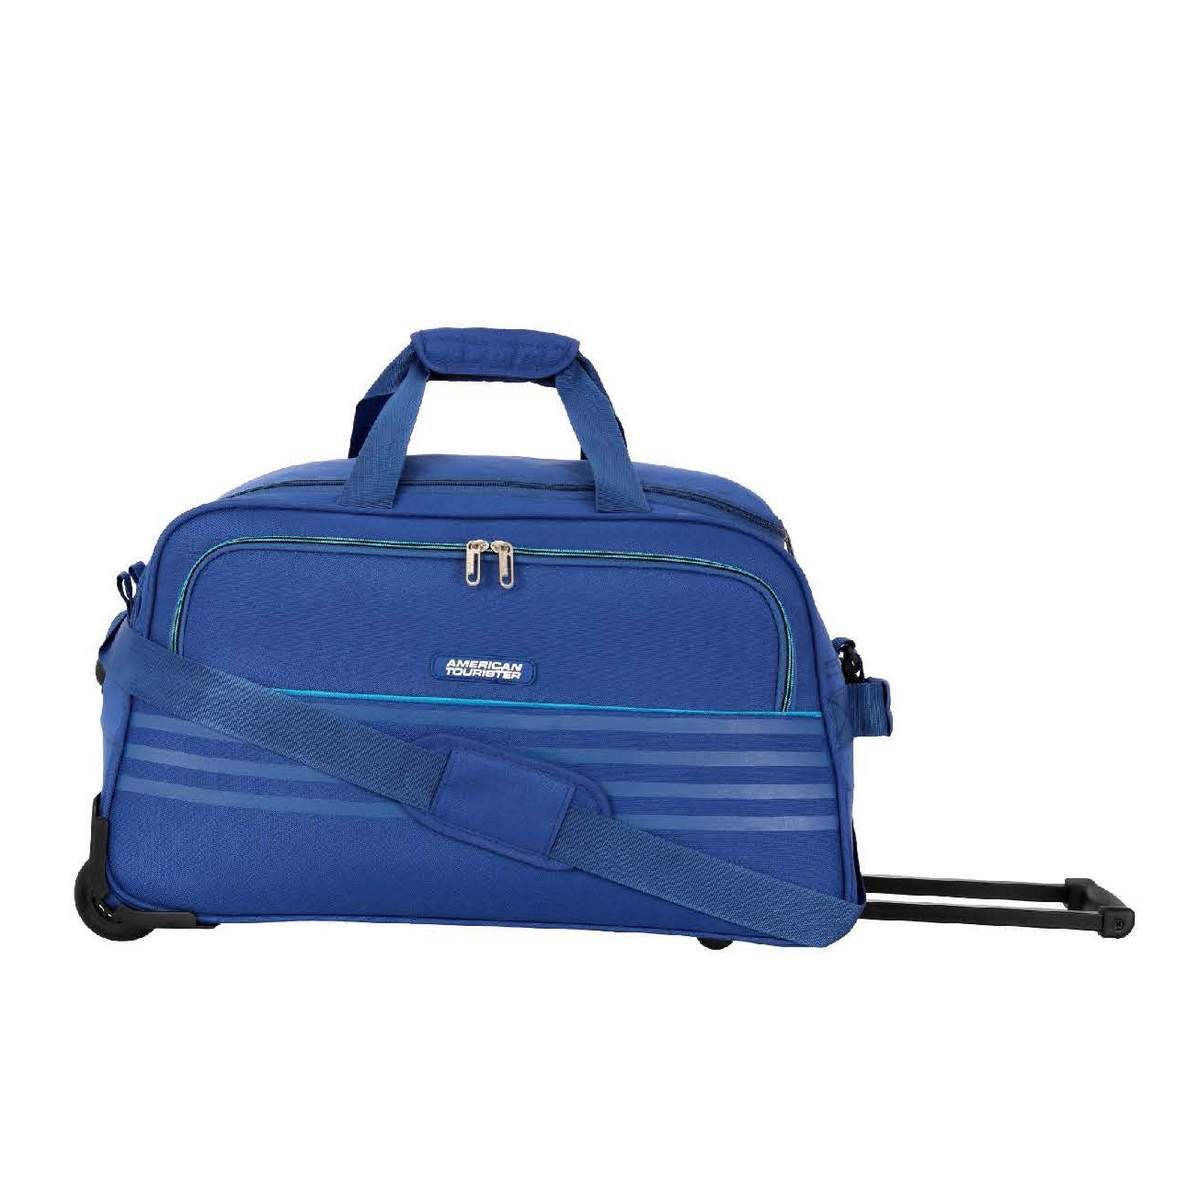 American Tourister Suitcases - Buy American Tourister Suitcases Online at  Best Prices In India | Flipkart.com